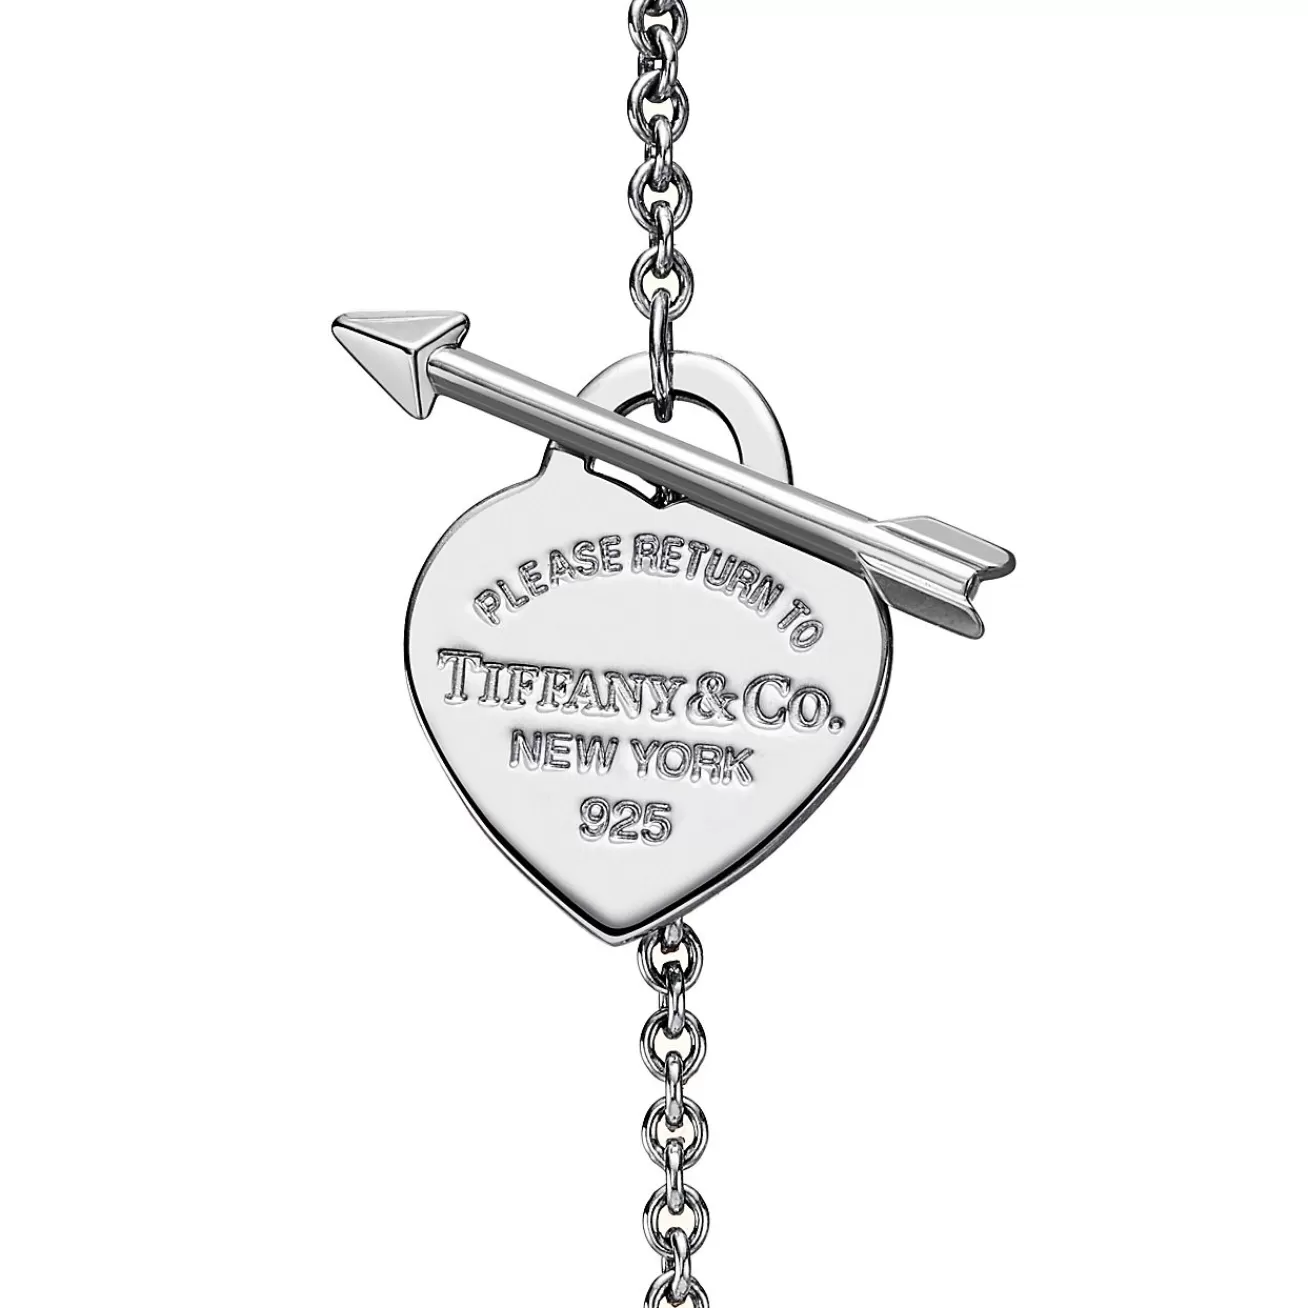 Tiffany & Co. Return to Tiffany® Lovestruck Heart Tag Bracelet in Sterling Silver, Small | ^ Bracelets | Gifts for Her